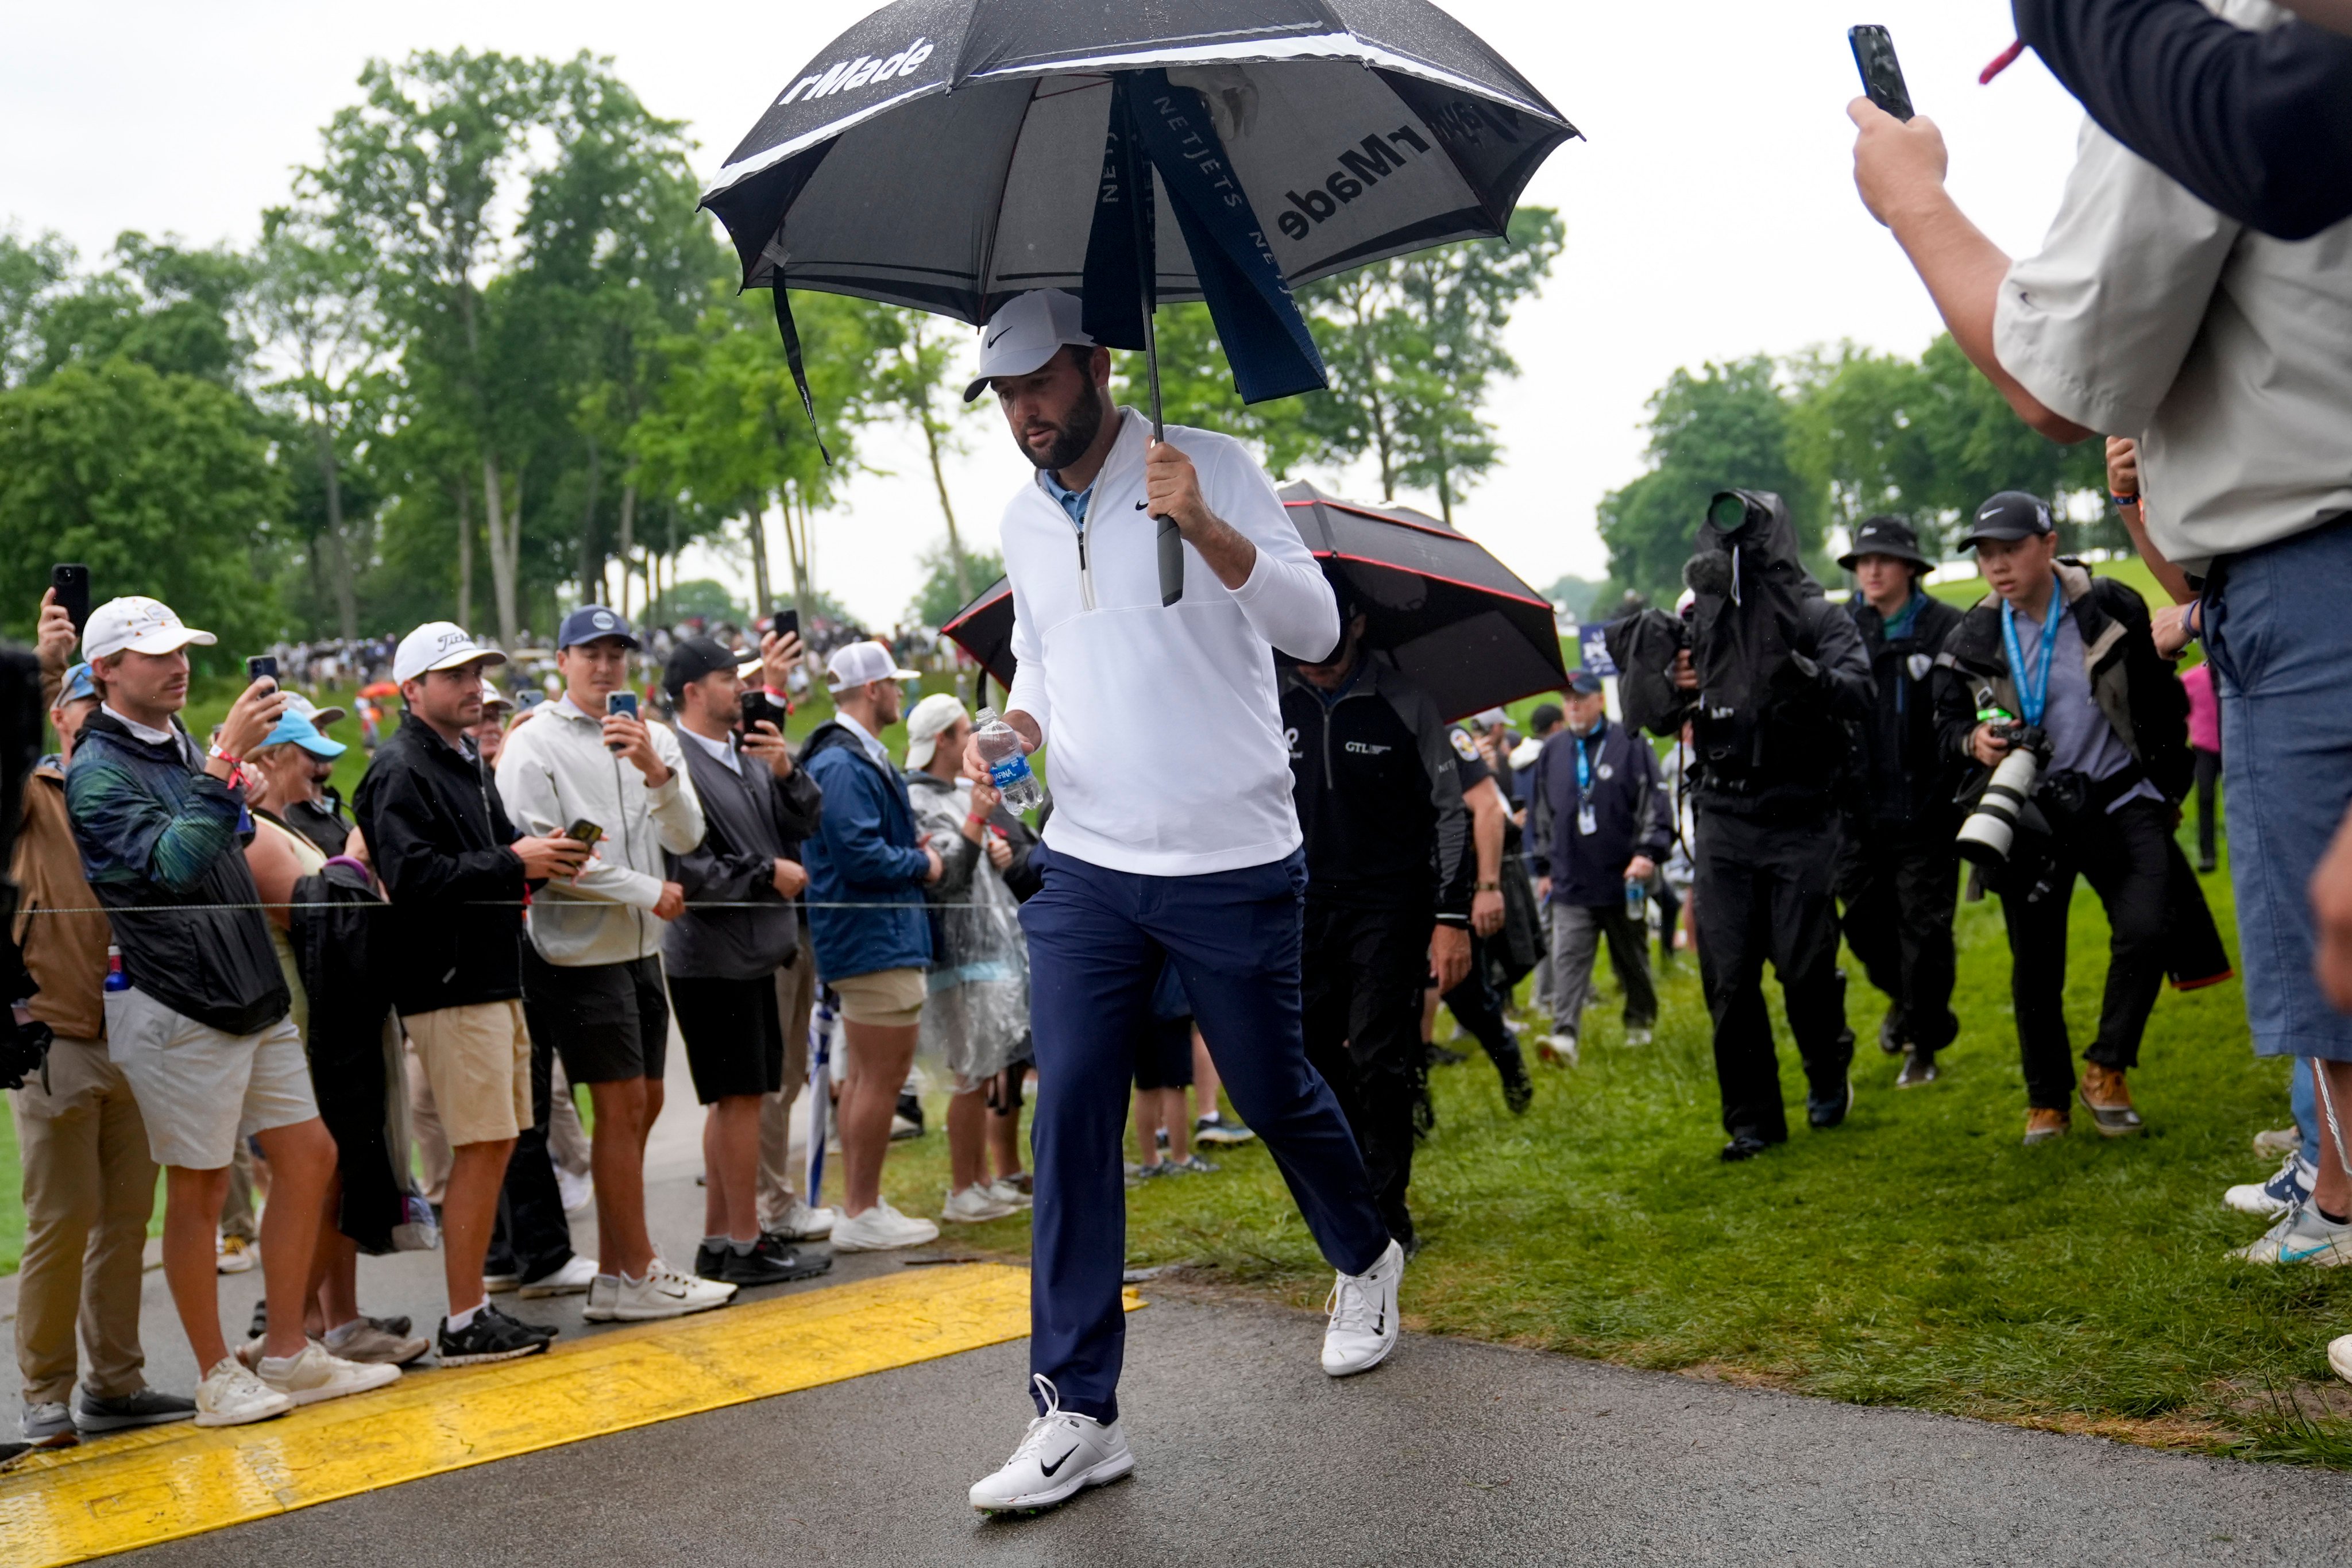 Scottie Scheffler walks to the tee on the 11th hole during the second round of the PGA Championship golf tournament at the Valhalla Golf Club on Friday. Photo: AP